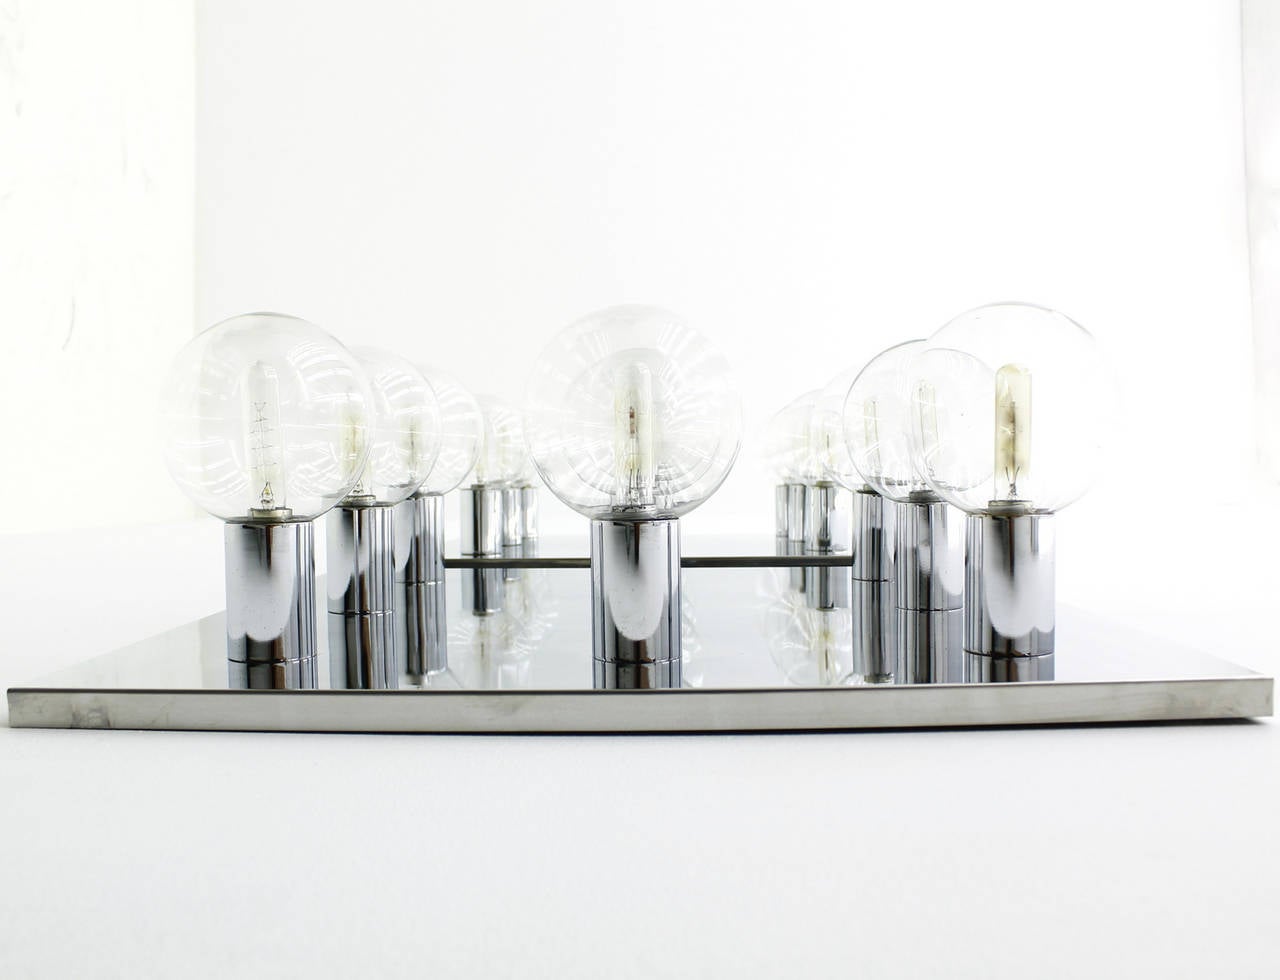 Late 20th Century Pair of Motoko Ishii Chrome and Glass Wall Sconces by Staff, 1970s